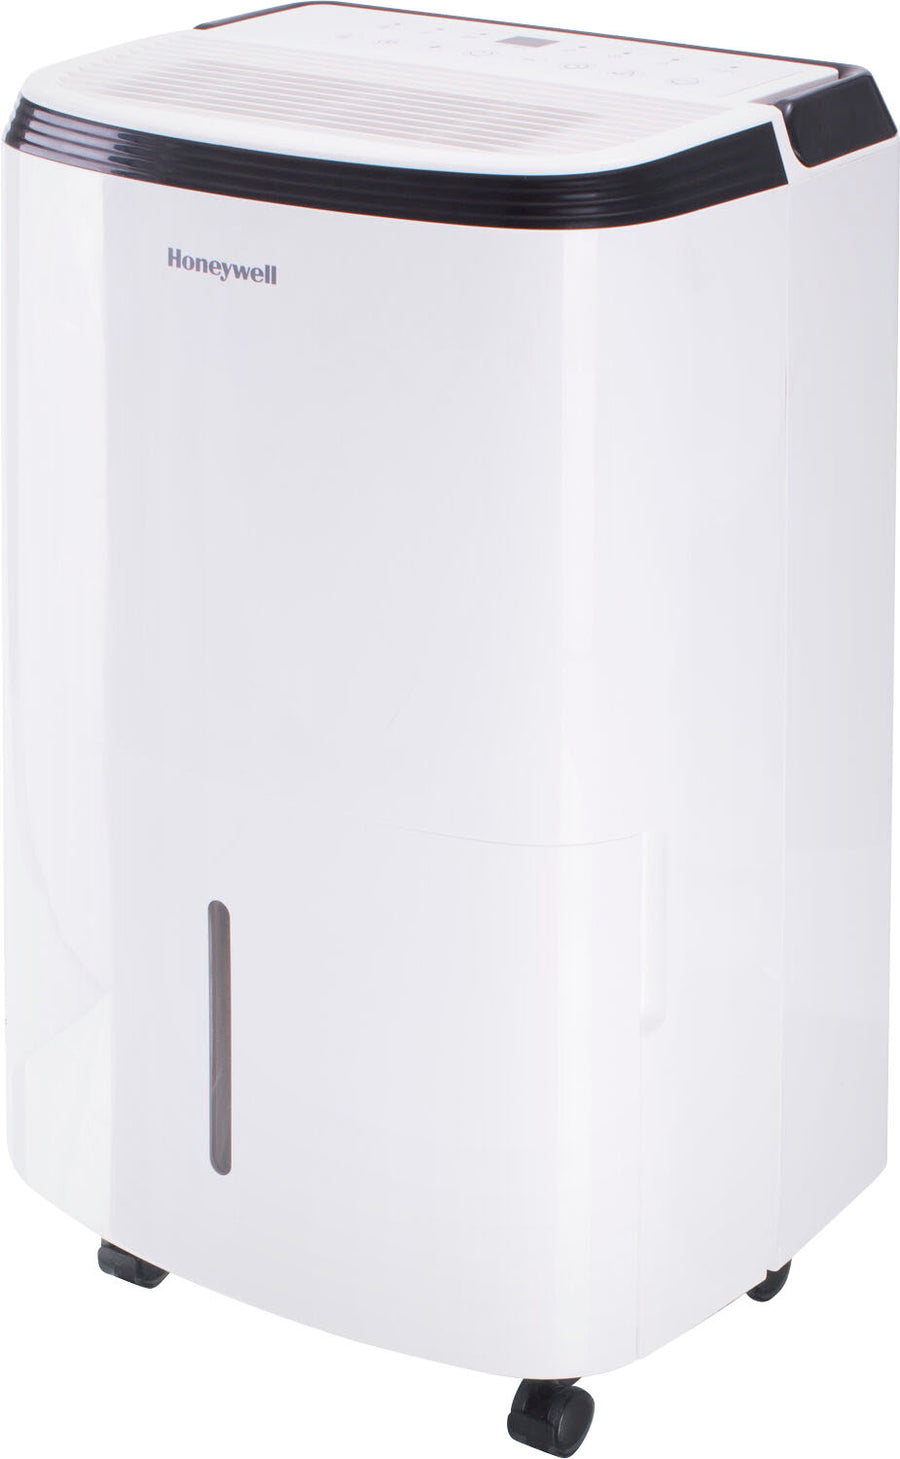 Honeywell - 70 pint Smart Wi-Fi Energy Star Dehumidifier for Basement & Large Room Up to 4000 Sq. Ft. - White_0